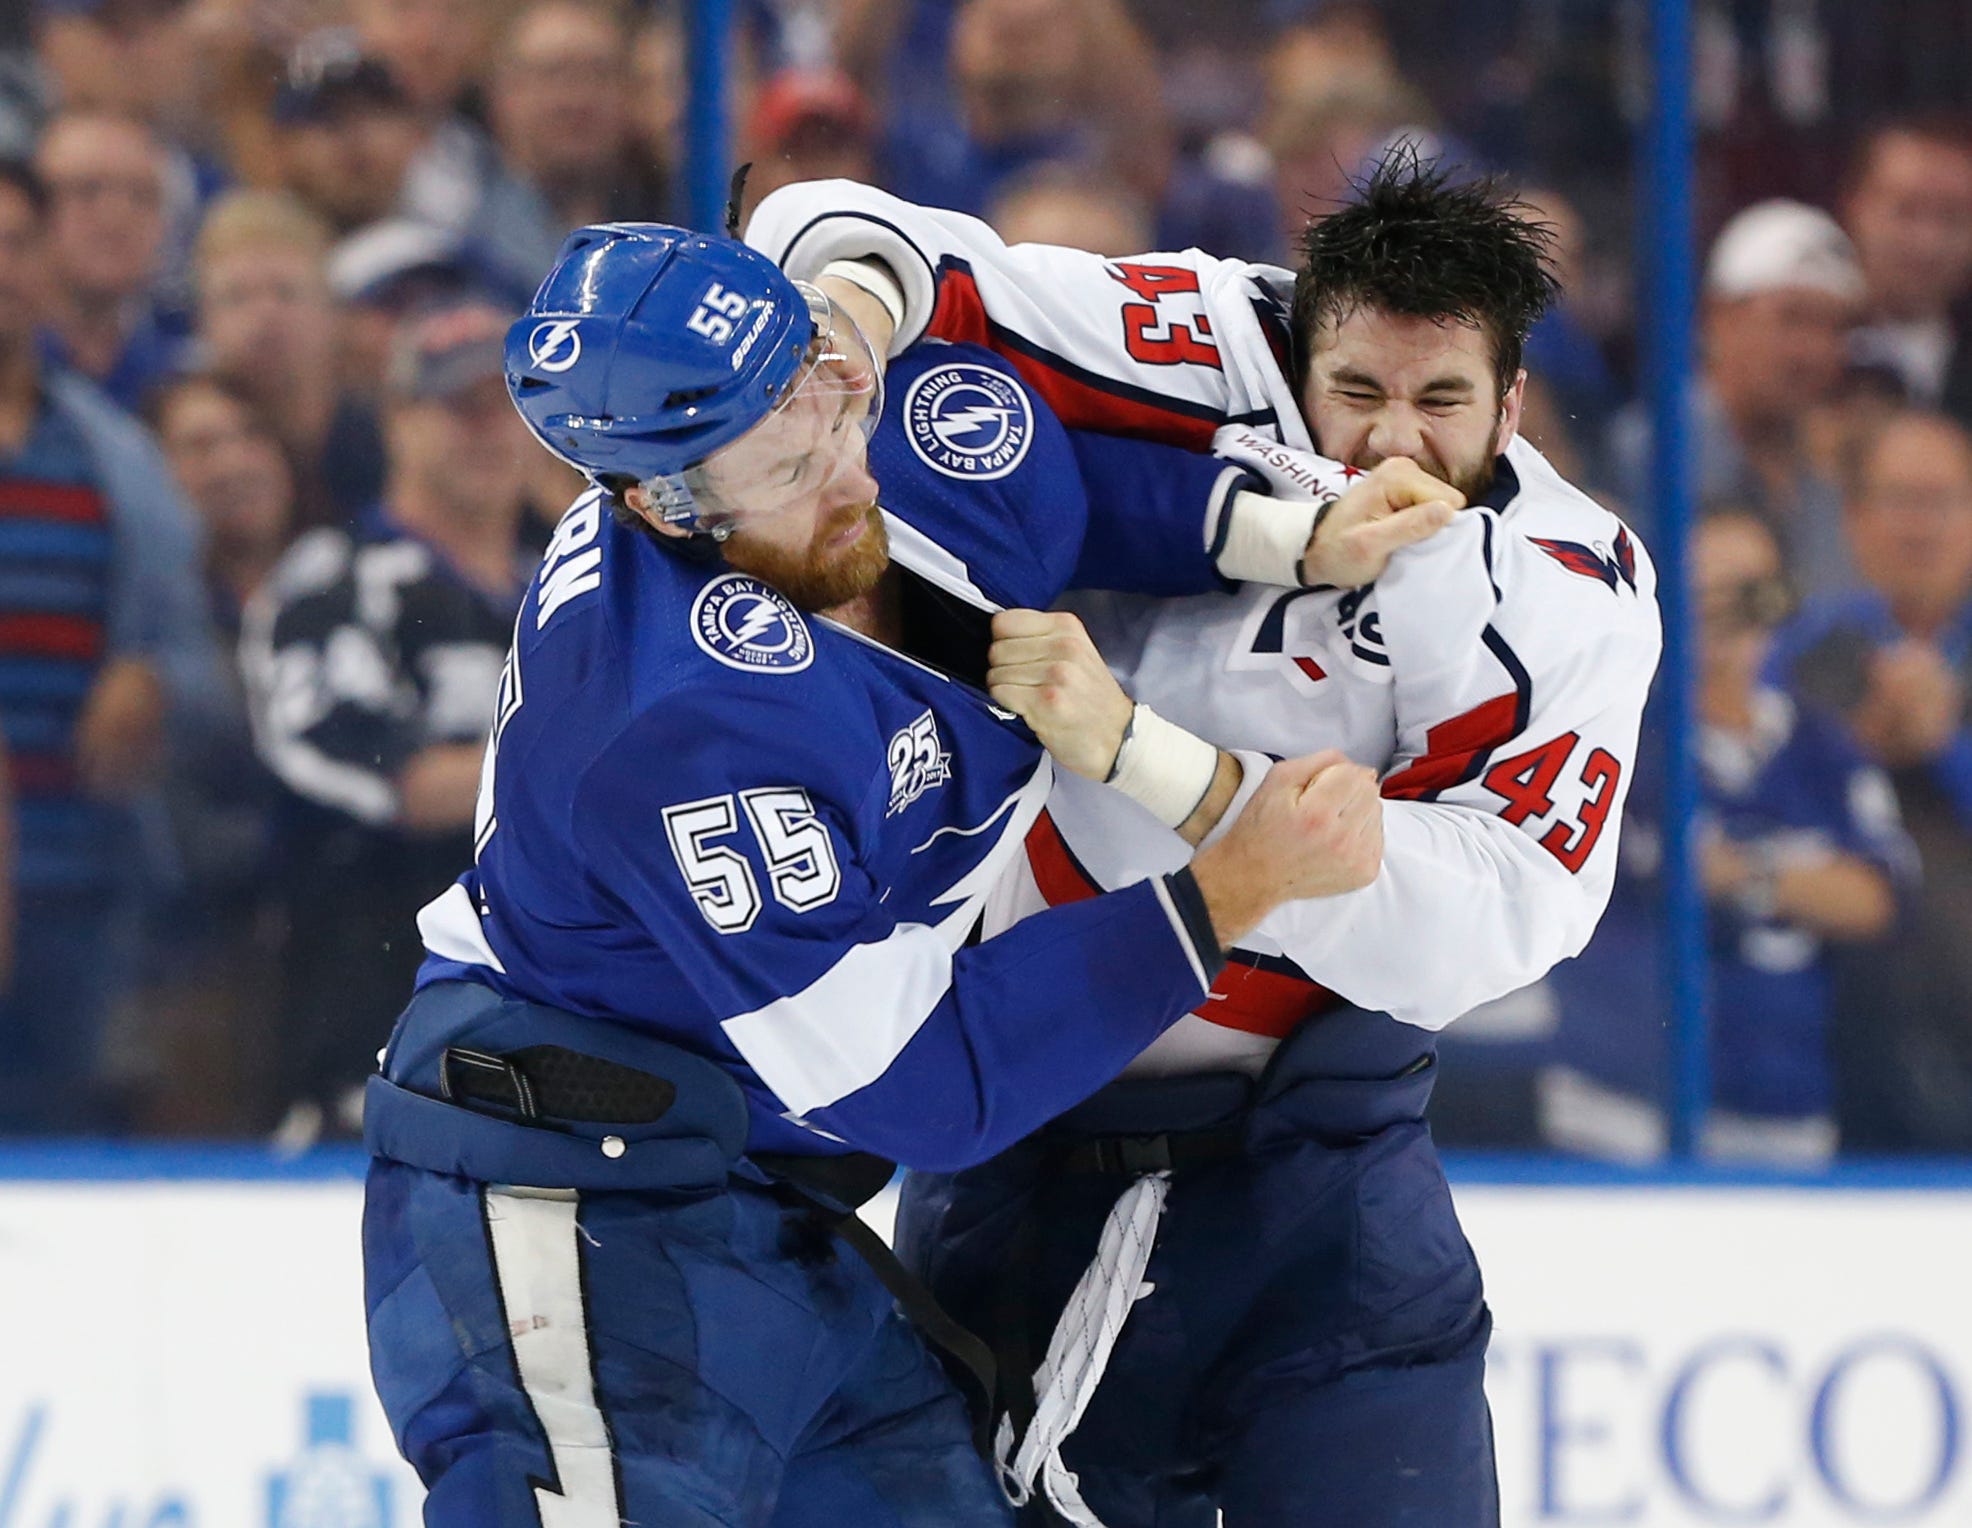 Washington Capitals right wing Tom Wilson, right, fights with Tampa Bay Lightning defenseman Braydon Coburn in the first period in game seven of the Eastern Conference Final in the 2018 Stanley Cup Playoffs at Amalie Arena in Tampa, Fla.